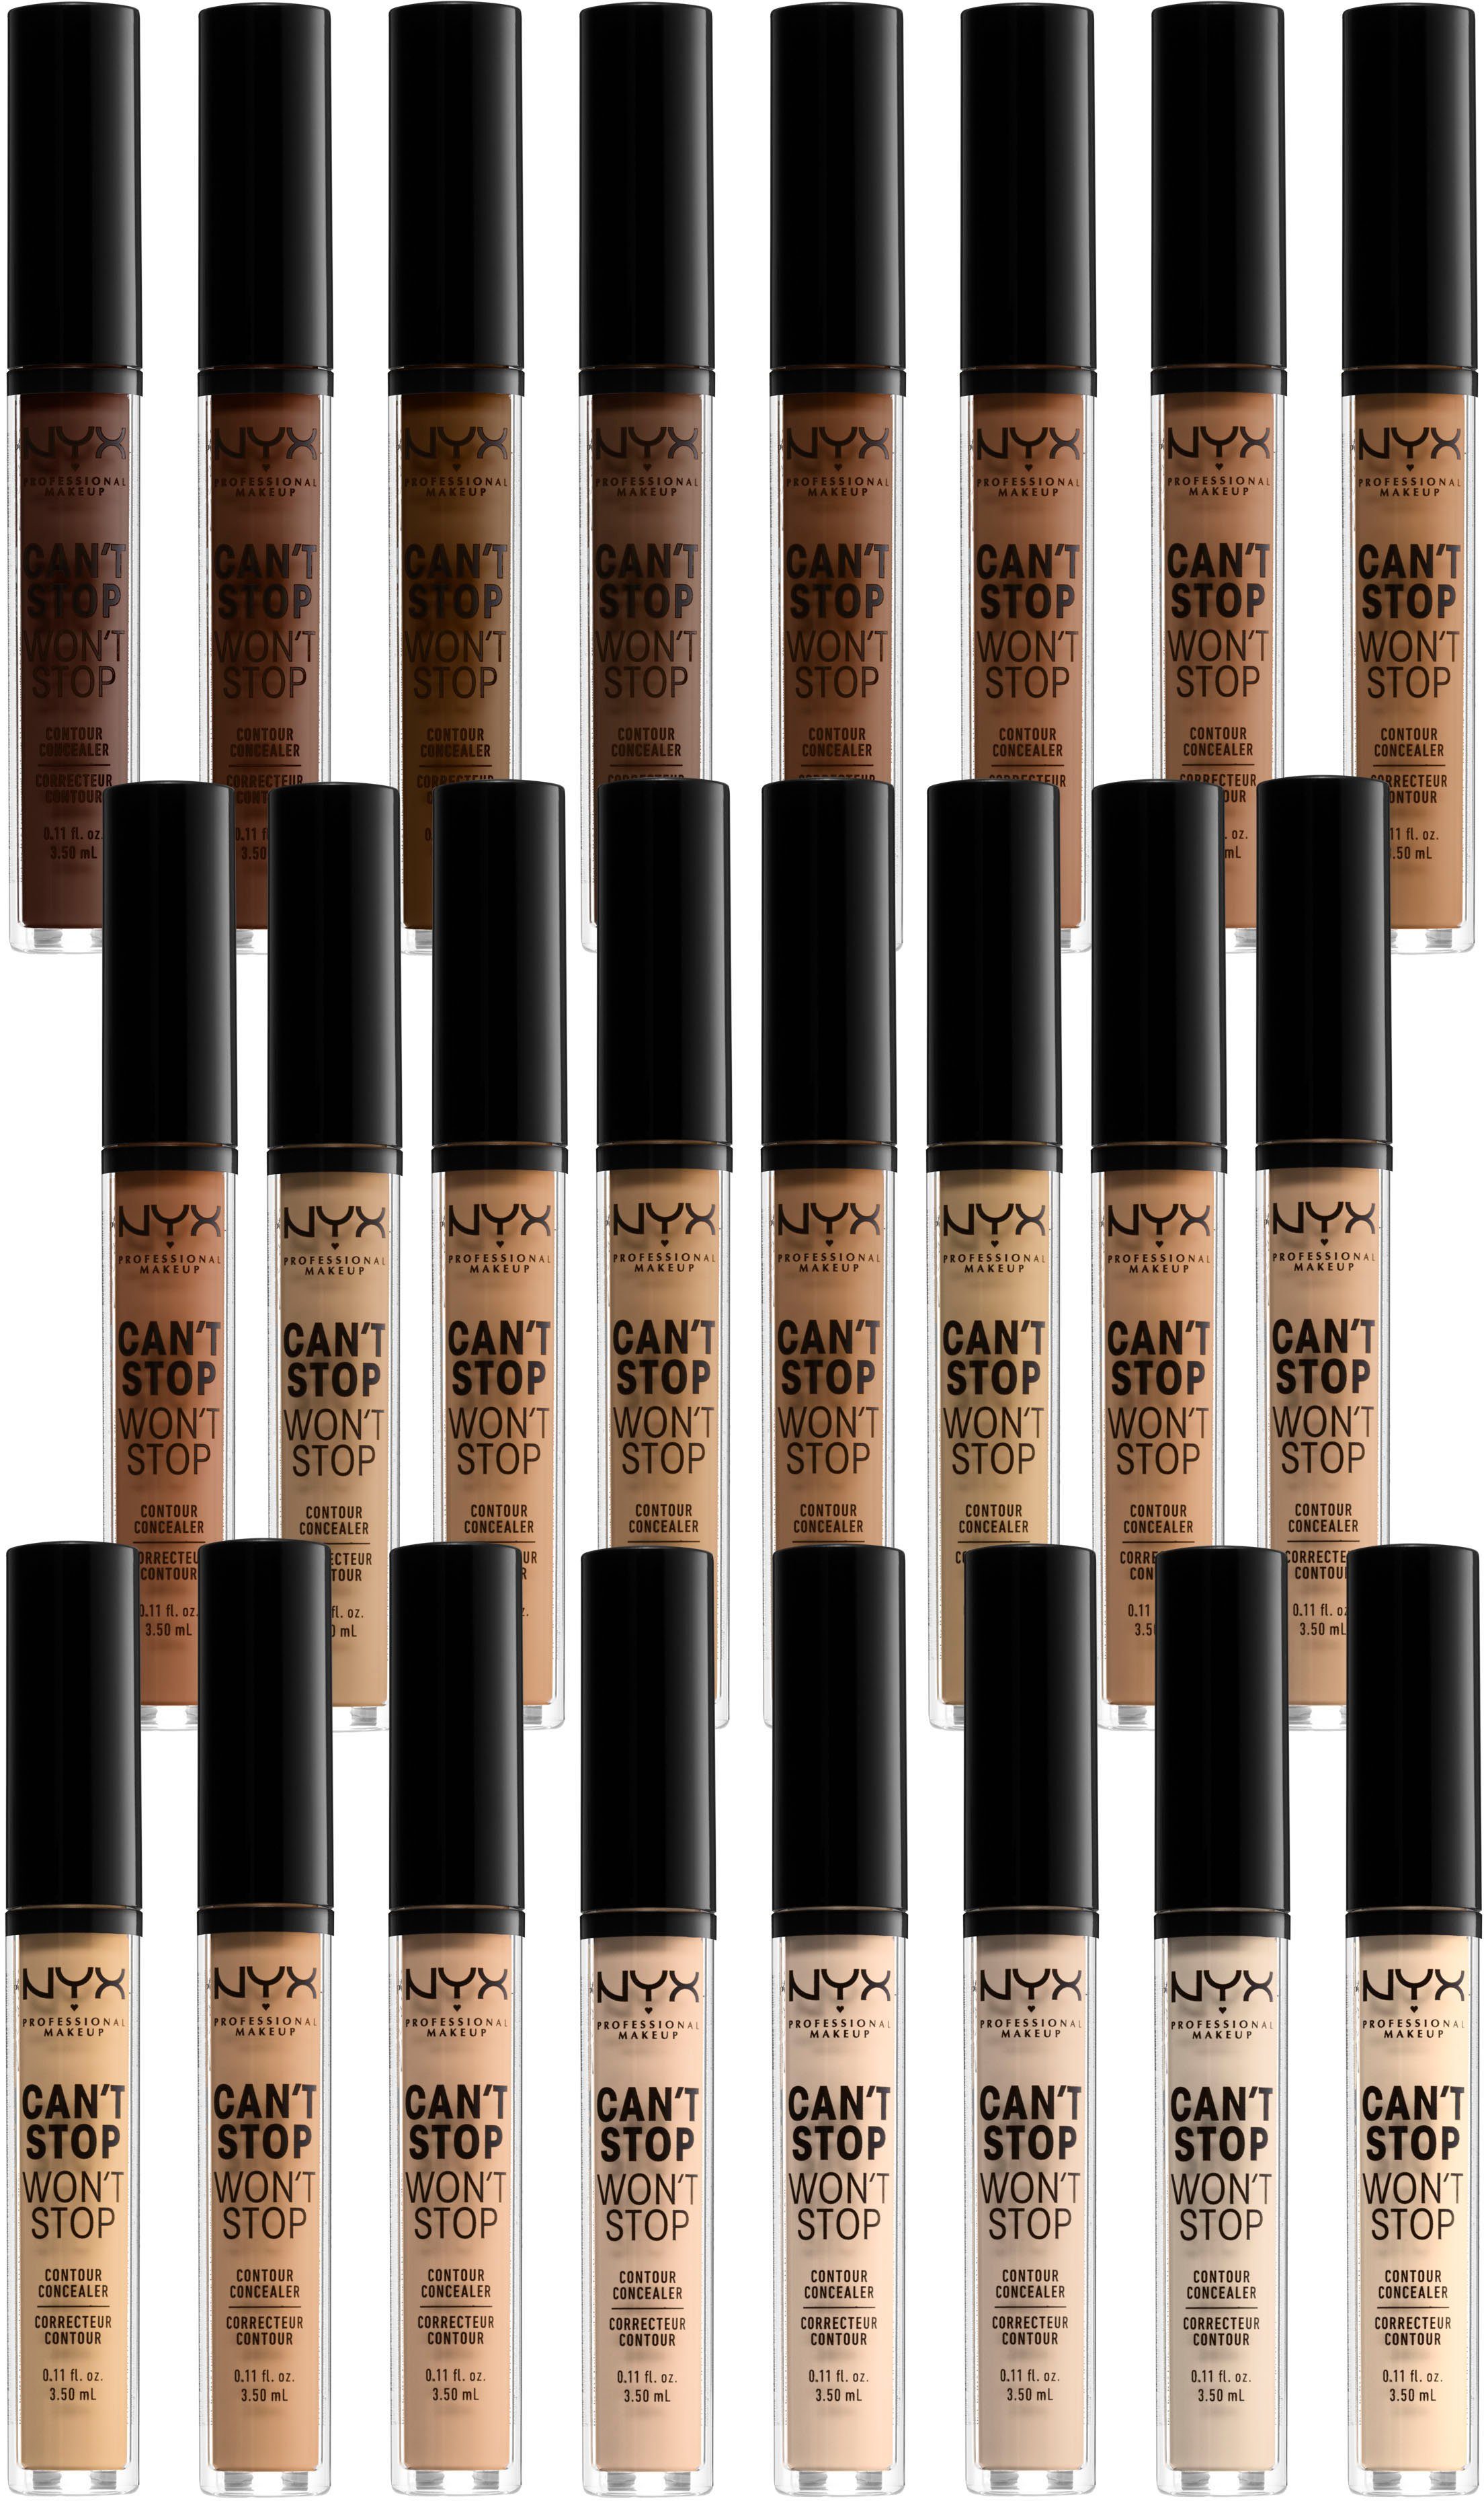 CSWSC01 Makeup NYX Stop Professional NYX Can´t Pale Won´t Stop Concealer Concealer